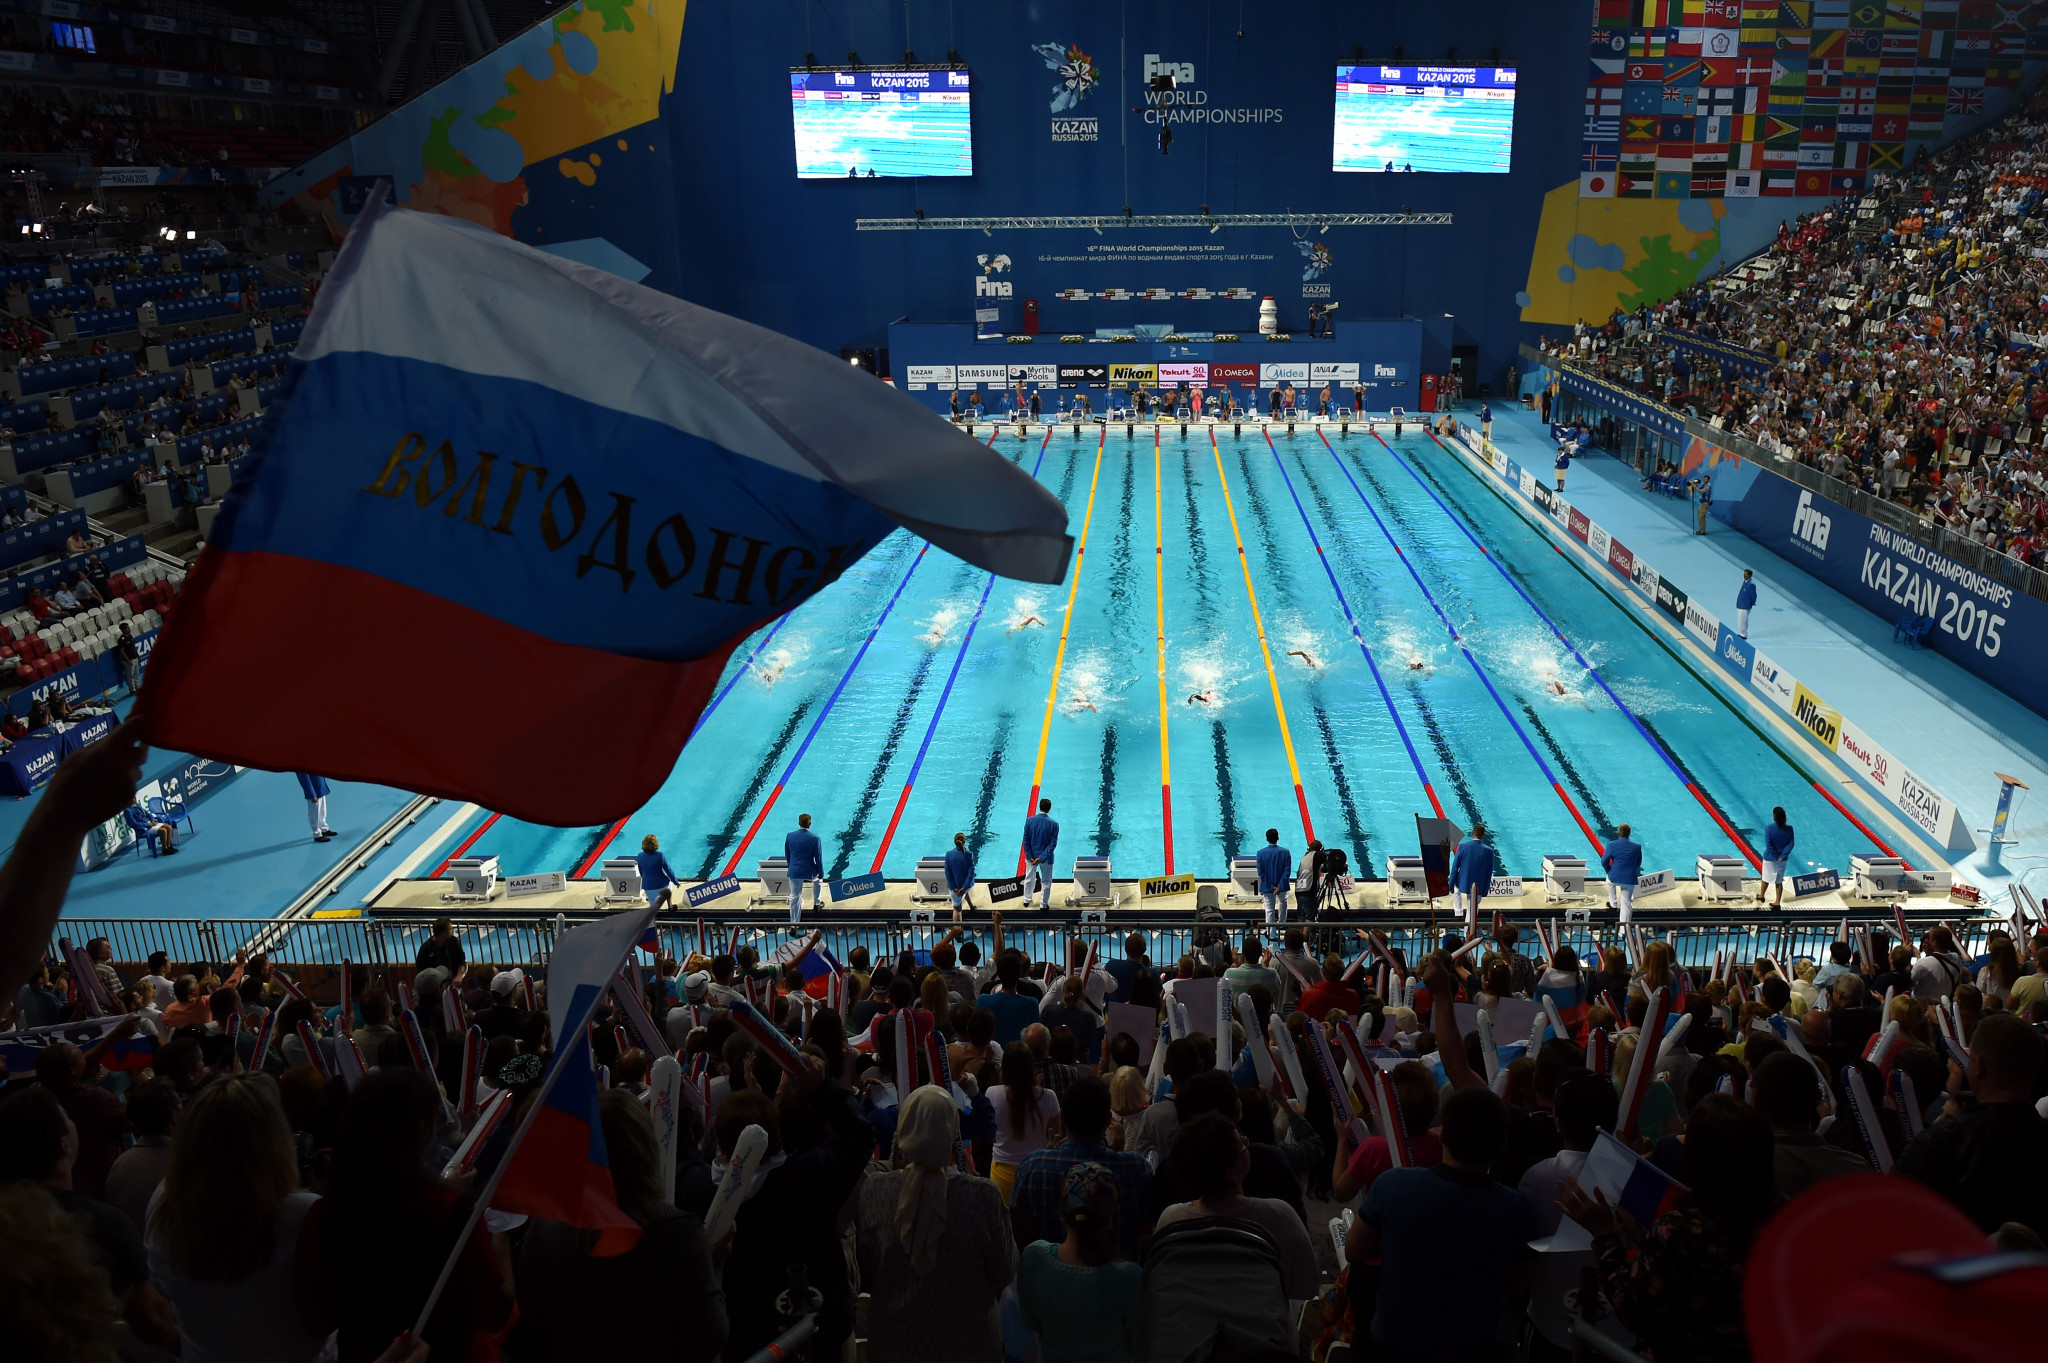 Kazan hosted the 2015 FINA World Championships and the 2013 Summer Universiade ©Getty Images